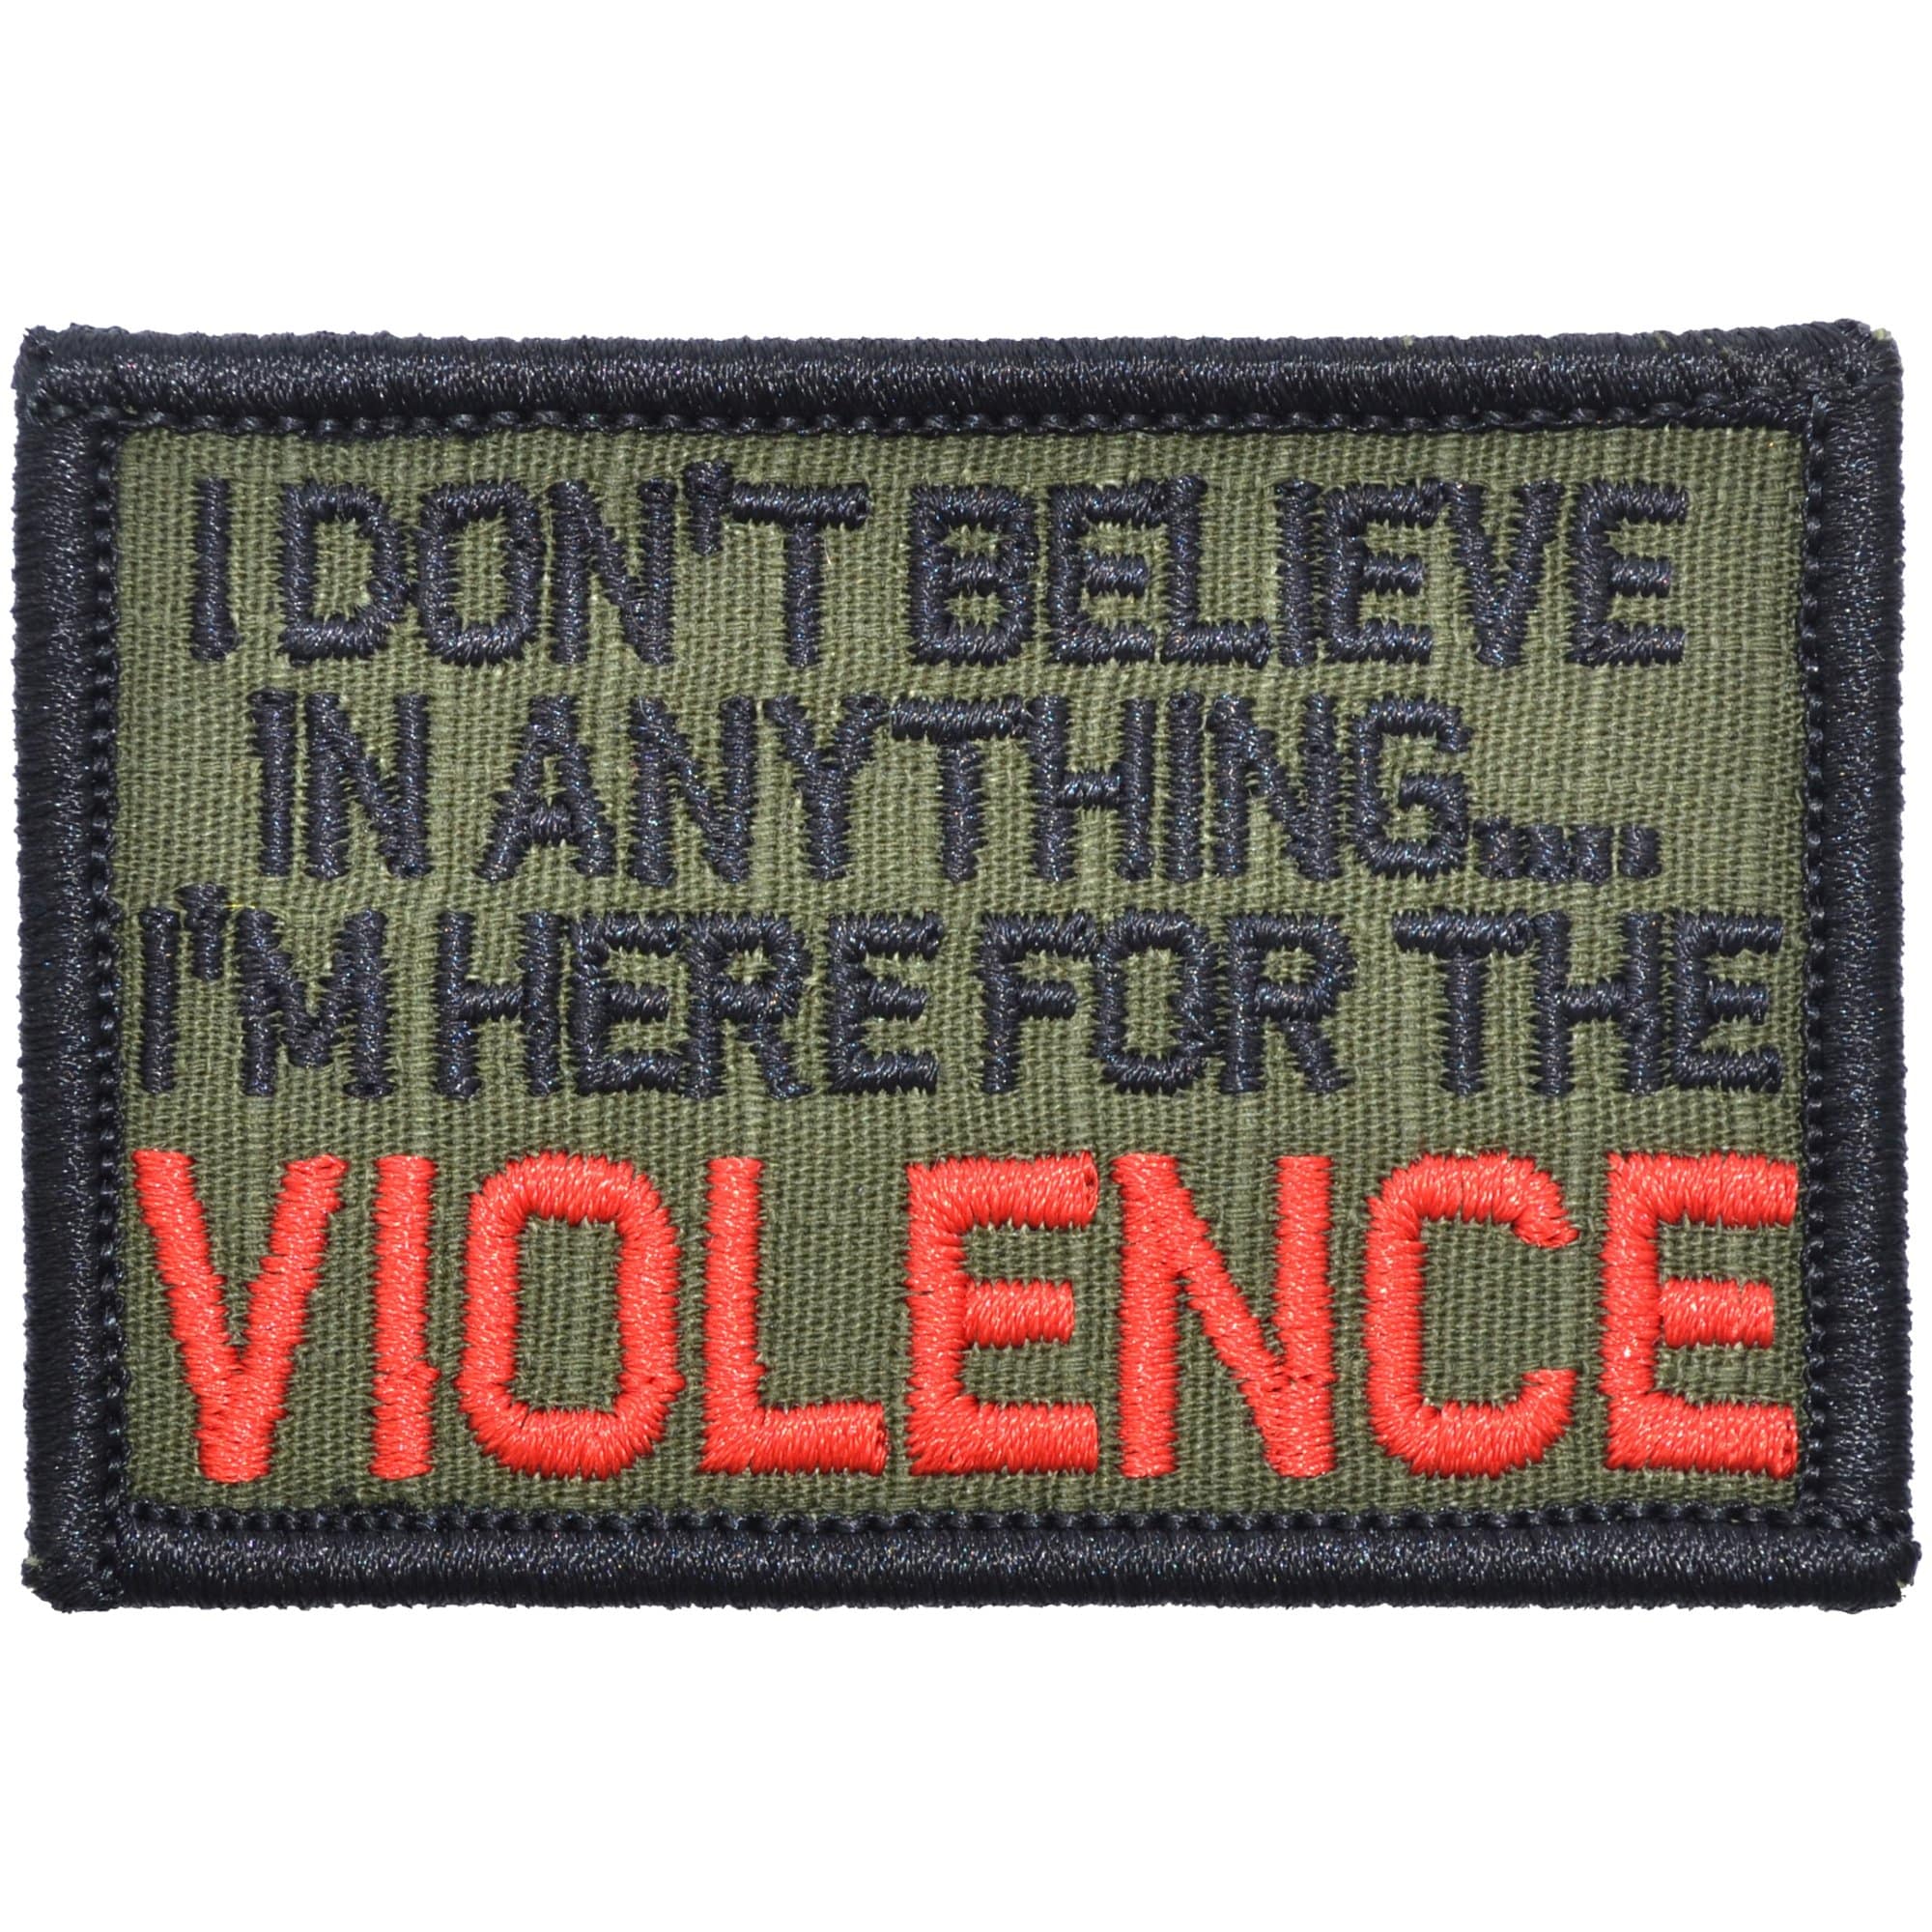 Tactical Gear Junkie Patches Olive Drab I Don't Believe In Anything... I'm Here for the Violence - 2x3 Patch